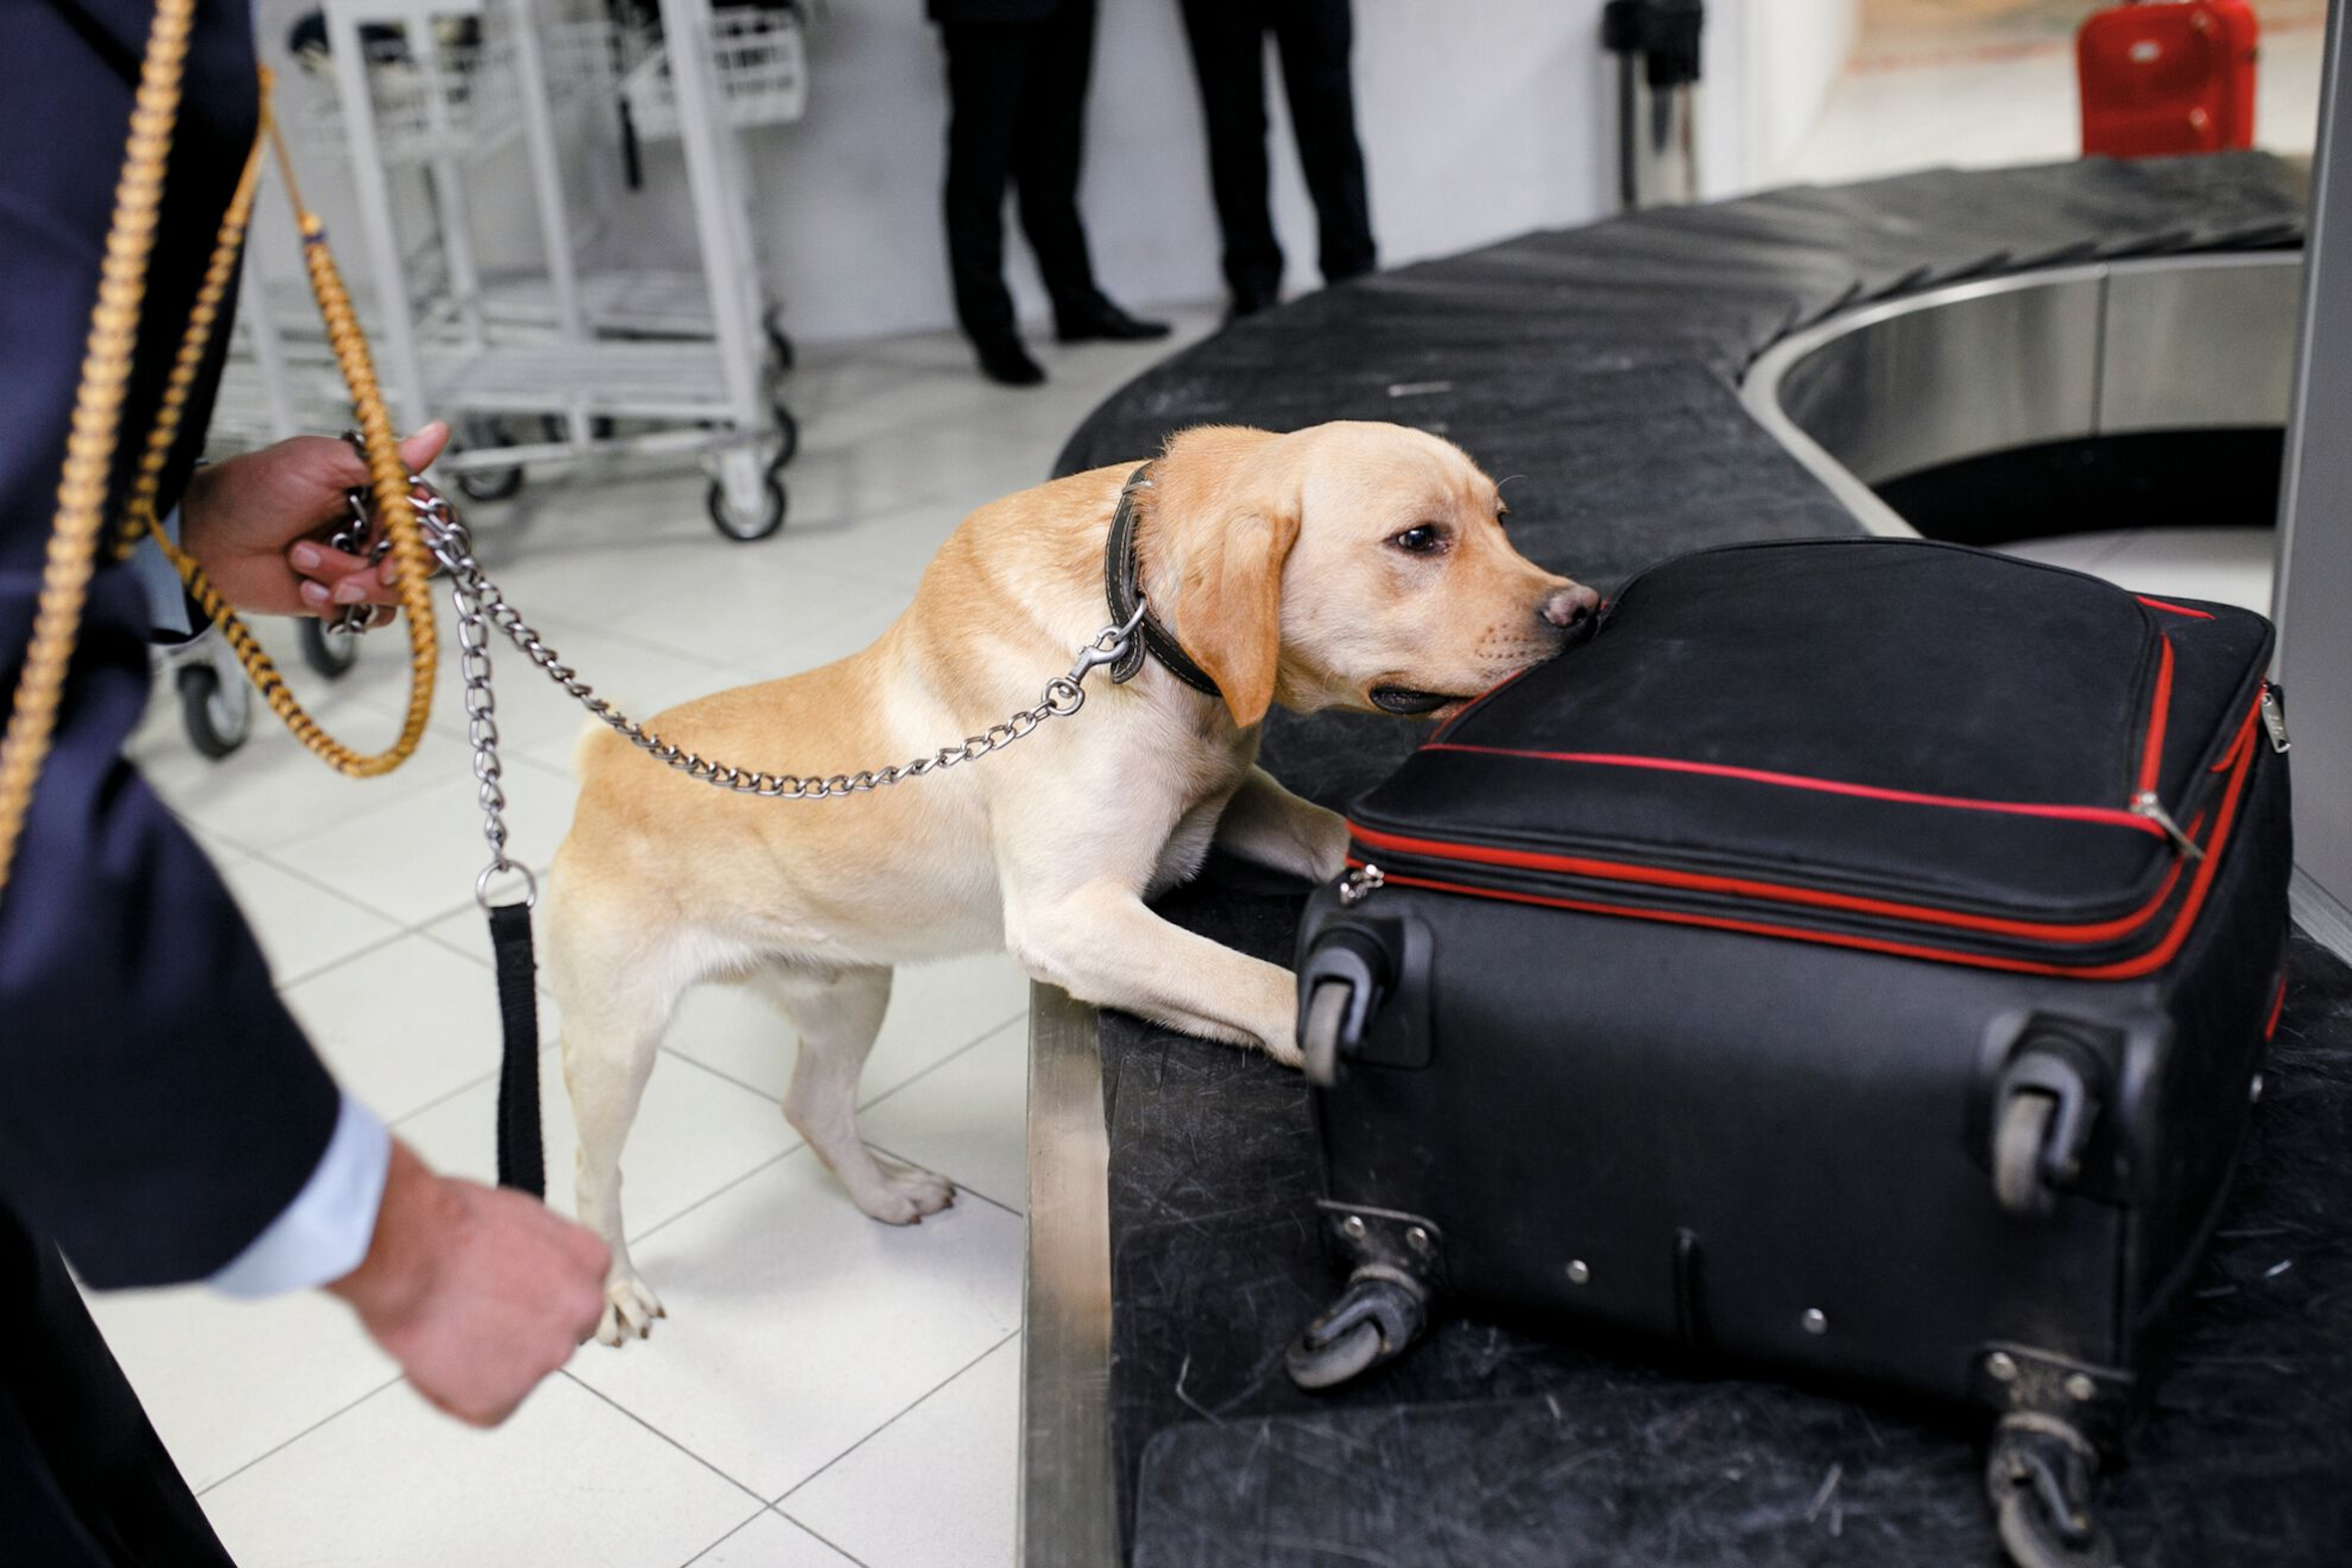 The job description for working dogs varies immensely, and can include detection of drugs and other banned substances at airports